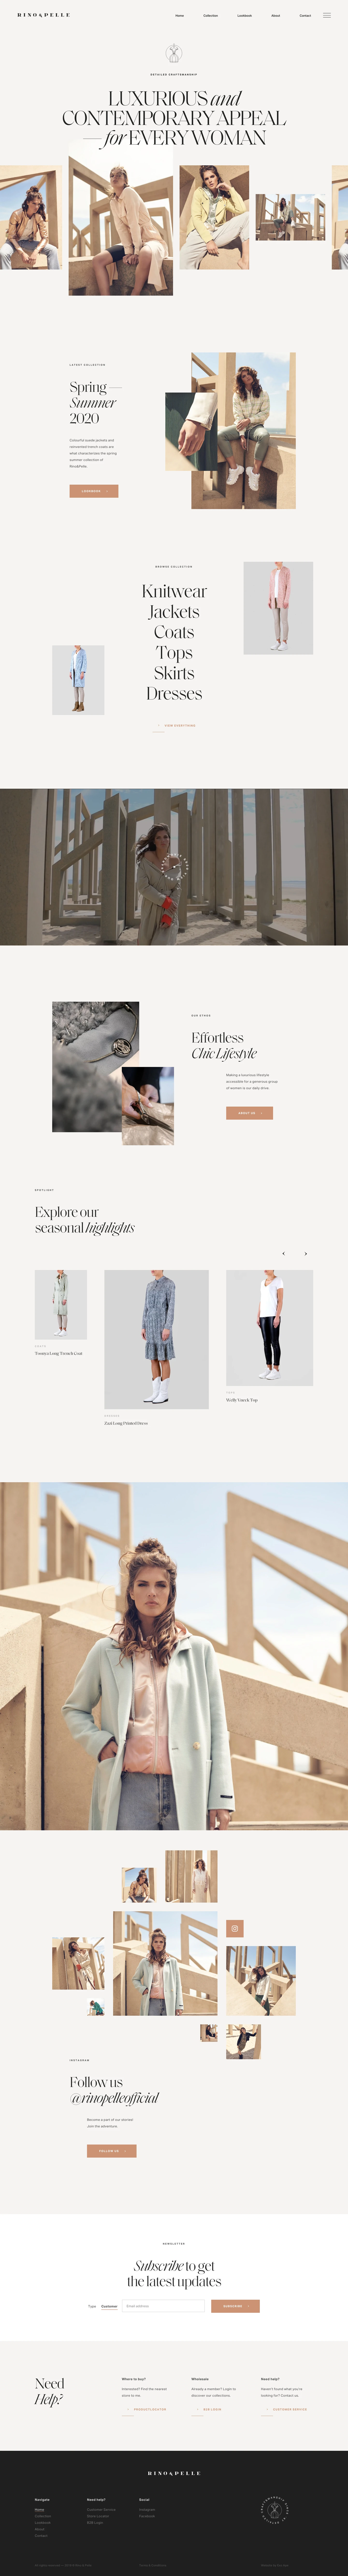 Rino & Pelle Landing Page Example: Luxurious and contemporary appeal for every woman. We bring luxurious and contemporary fashion items for wearable prices that enable severy woman to achieve that effortless chic lifestyle.